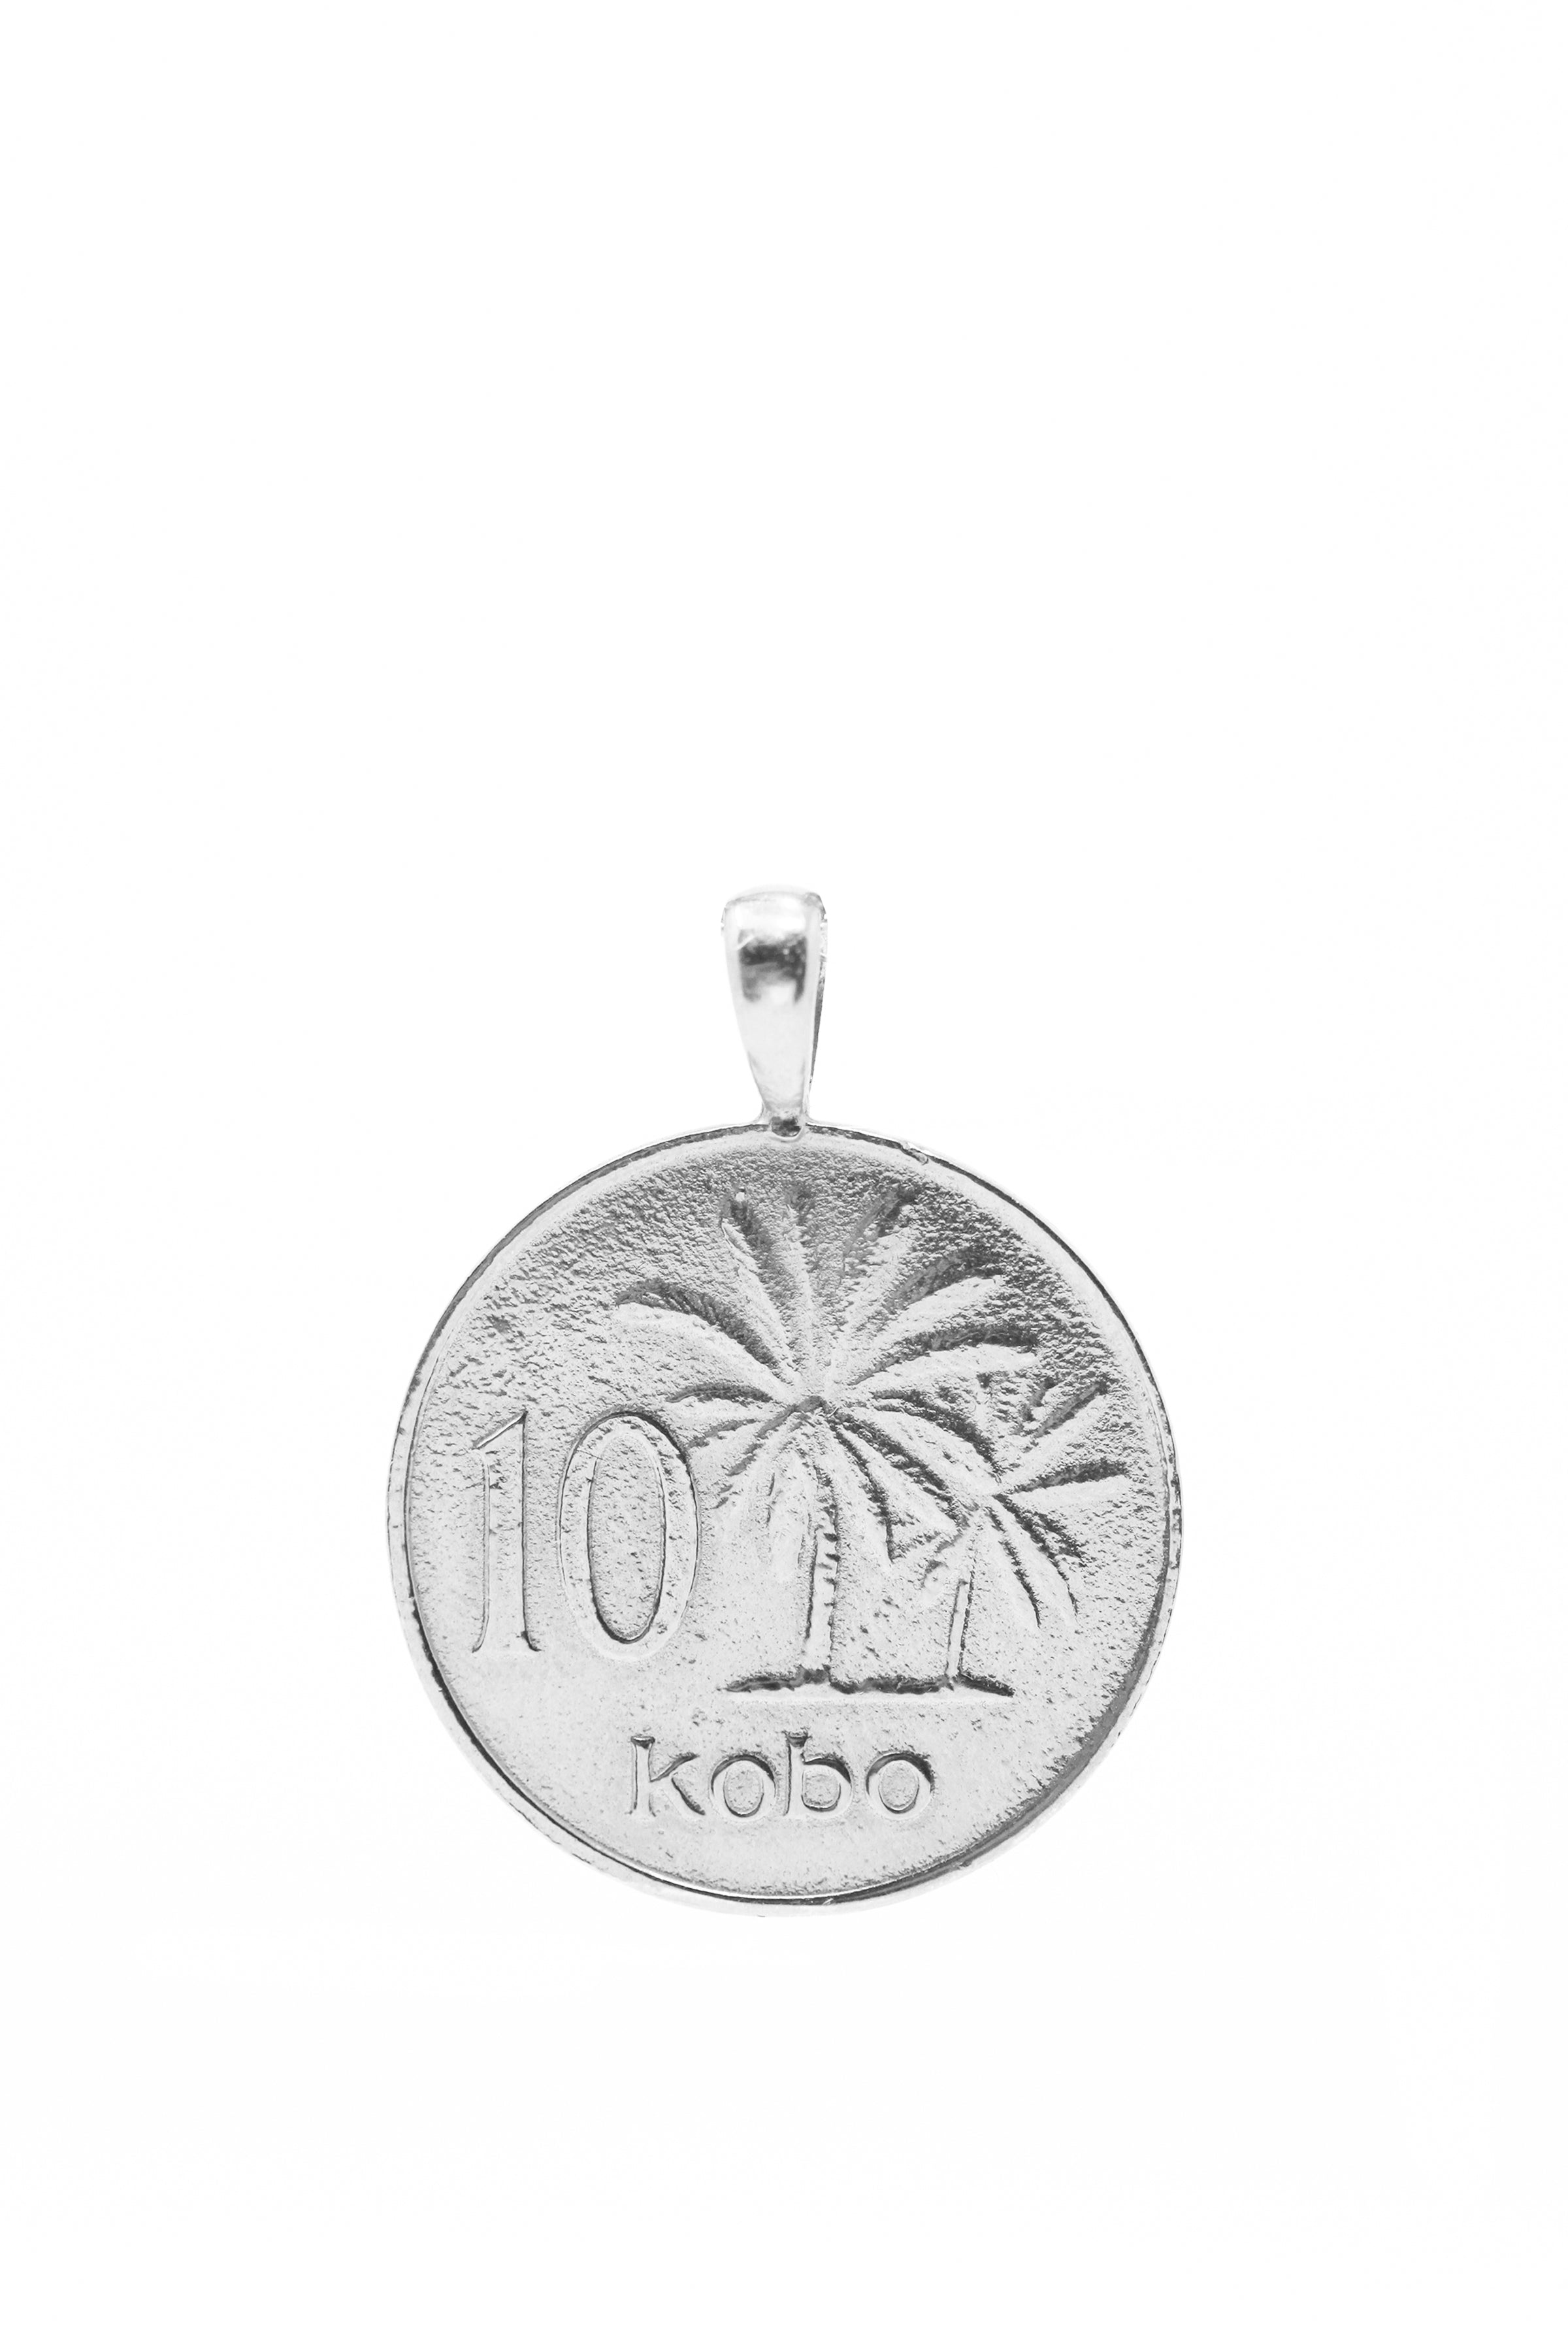 THE NIGERIA Crest and Palm Coin Pendant